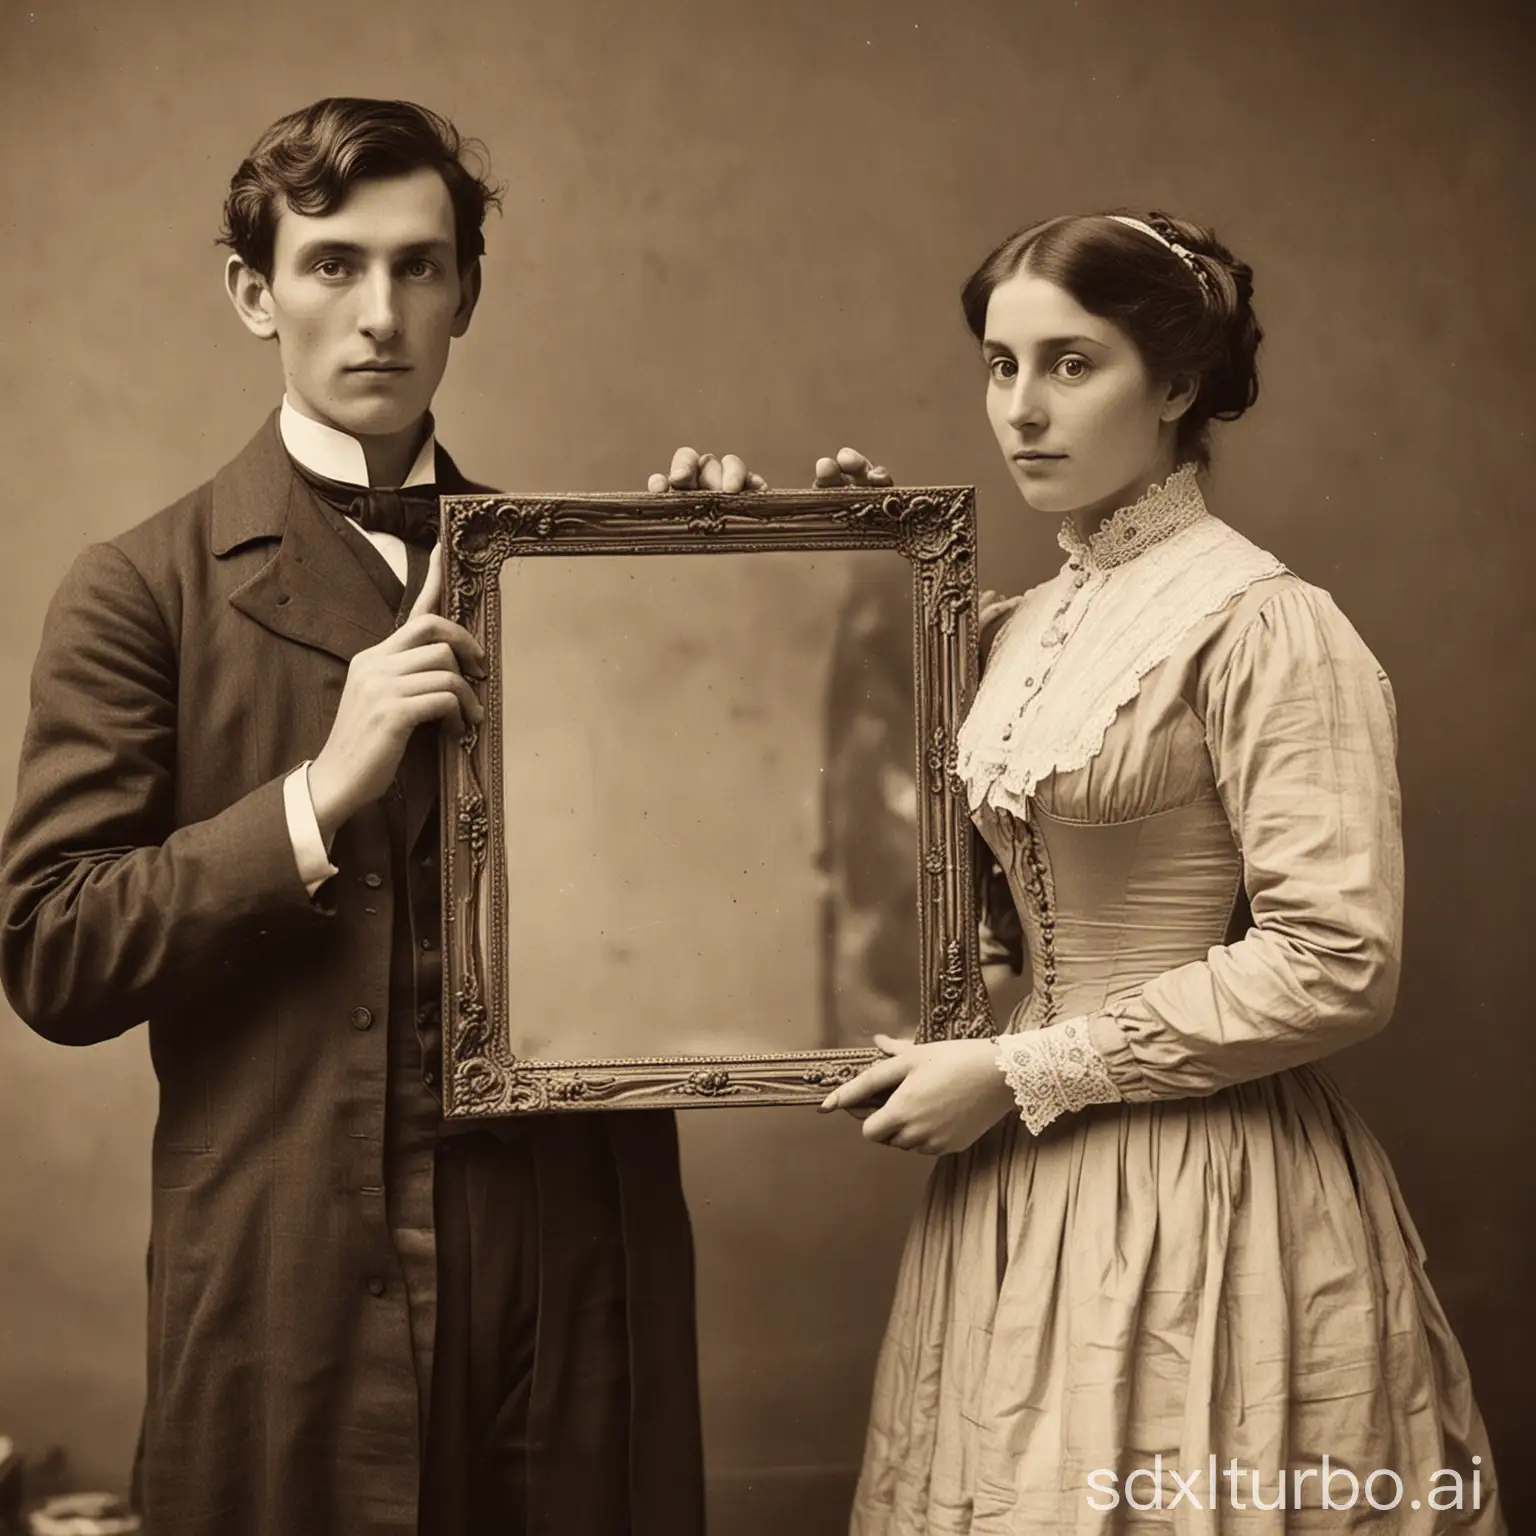 19th-Century-Photograph-of-Two-People-Holding-a-Mirror